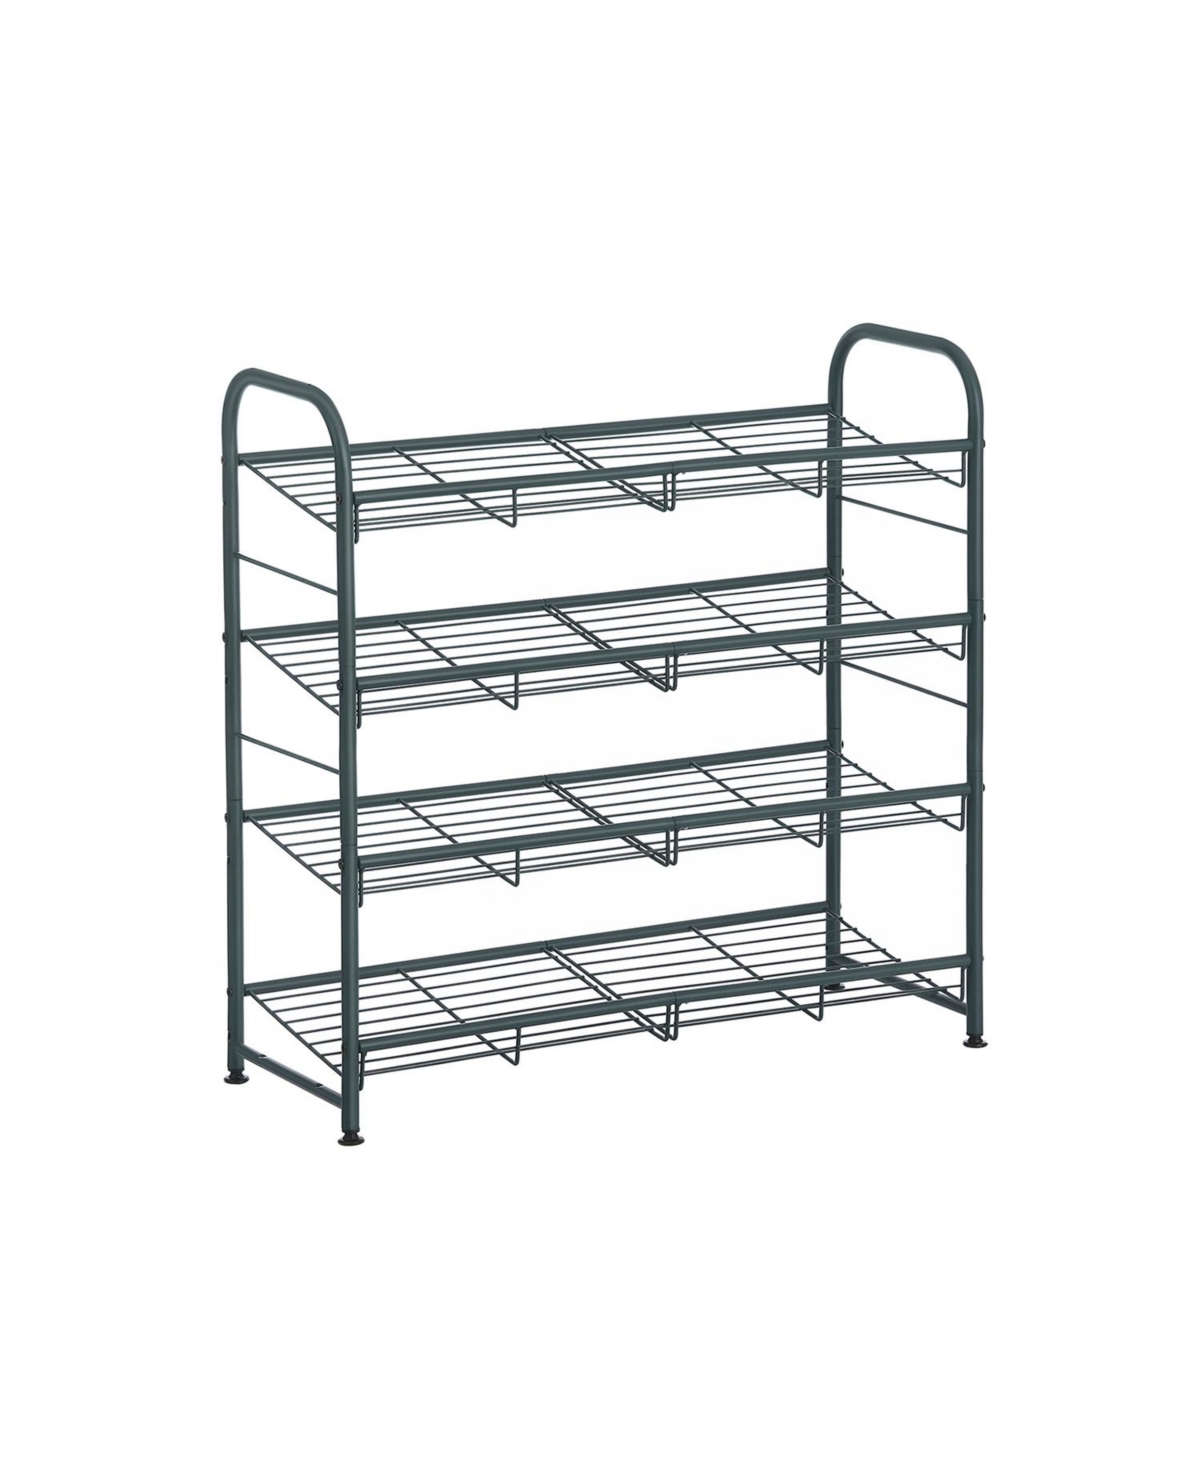 4-Tier Shoe Rack Storage Organizer, Hold up to 16 Pairs, Steel, for High Heels, Trainers, Slippers - Grey